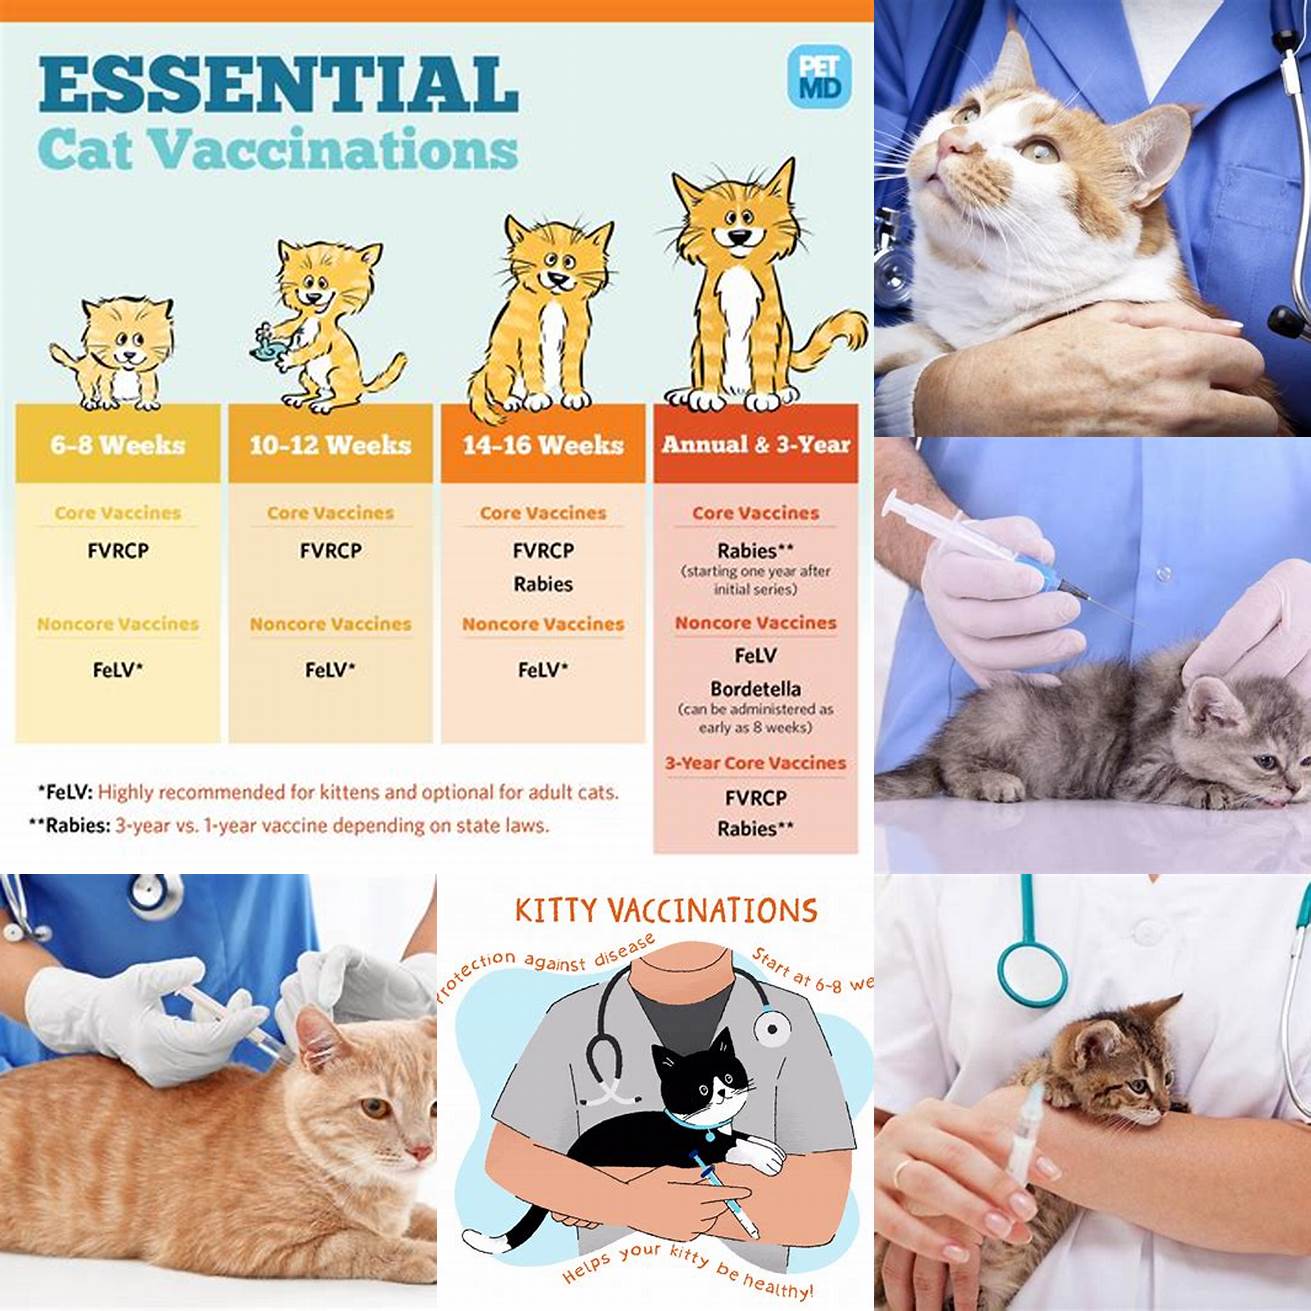 Keep your cat up-to-date on vaccinations Ensure that your cat is up-to-date on all of their vaccinations including the tetanus shot